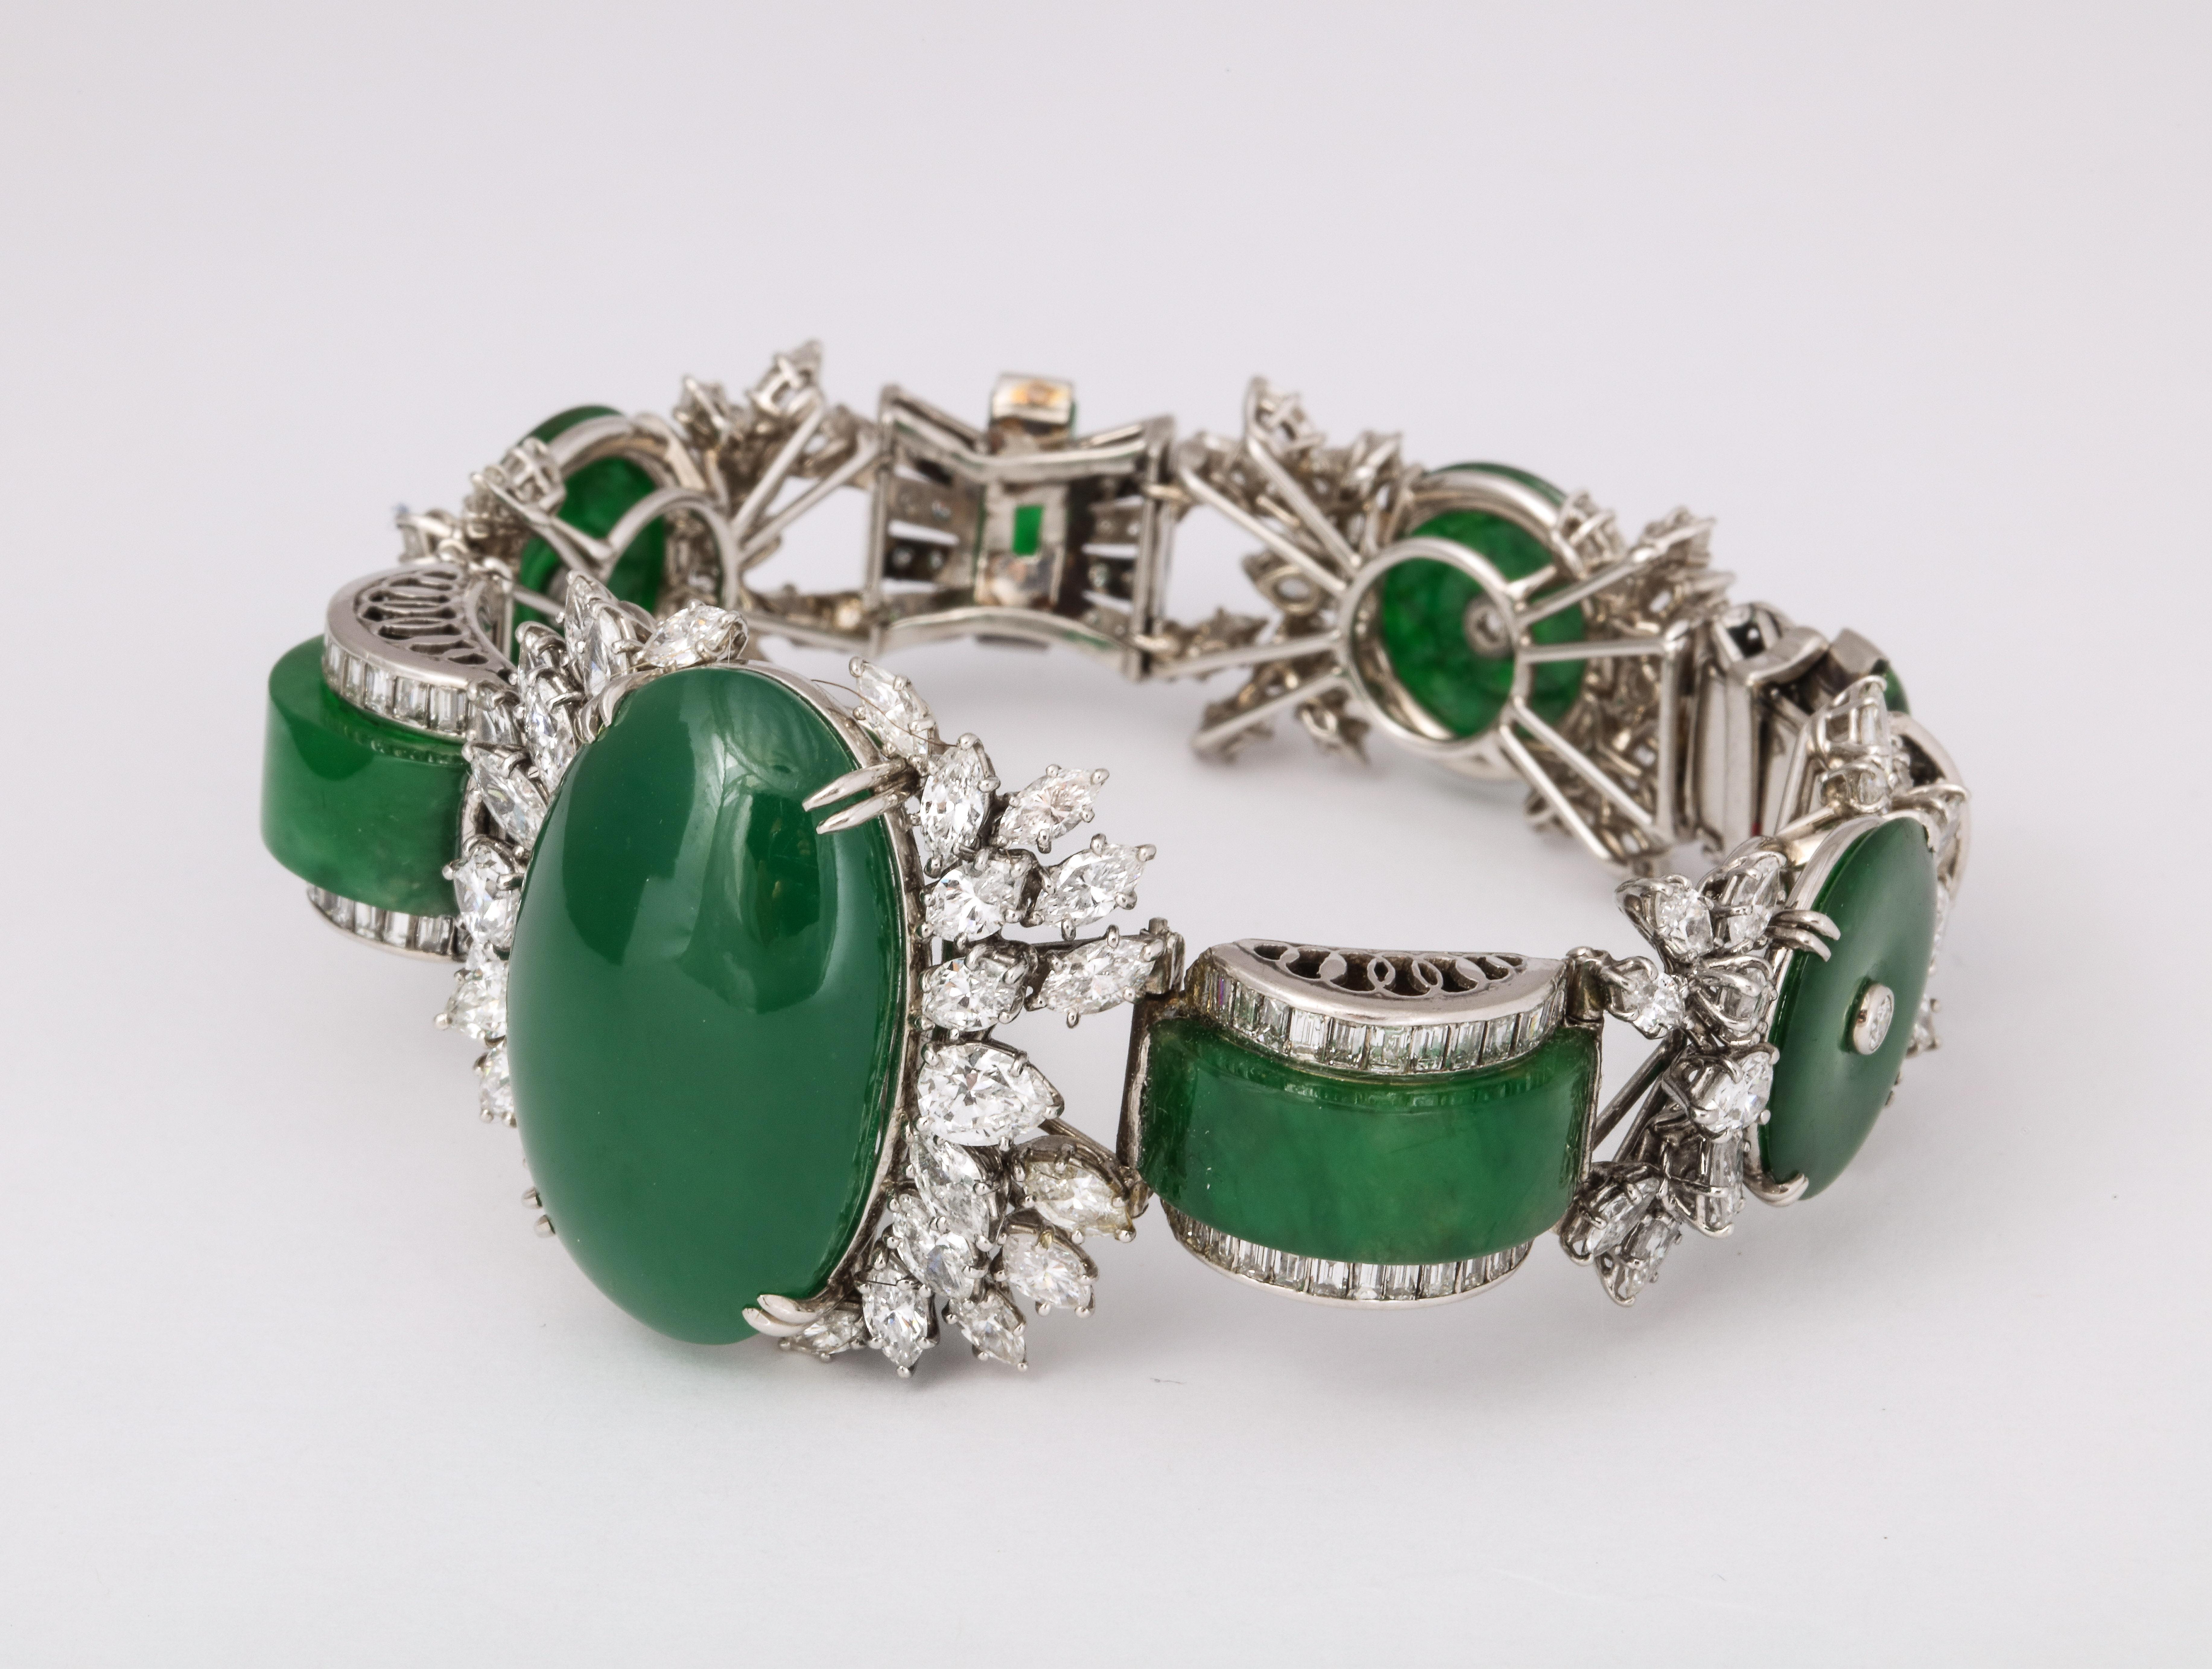 Harry Winston GIA Certified Jade Diamond Sehr wichtiges und seltenes Armband (Cabochon)